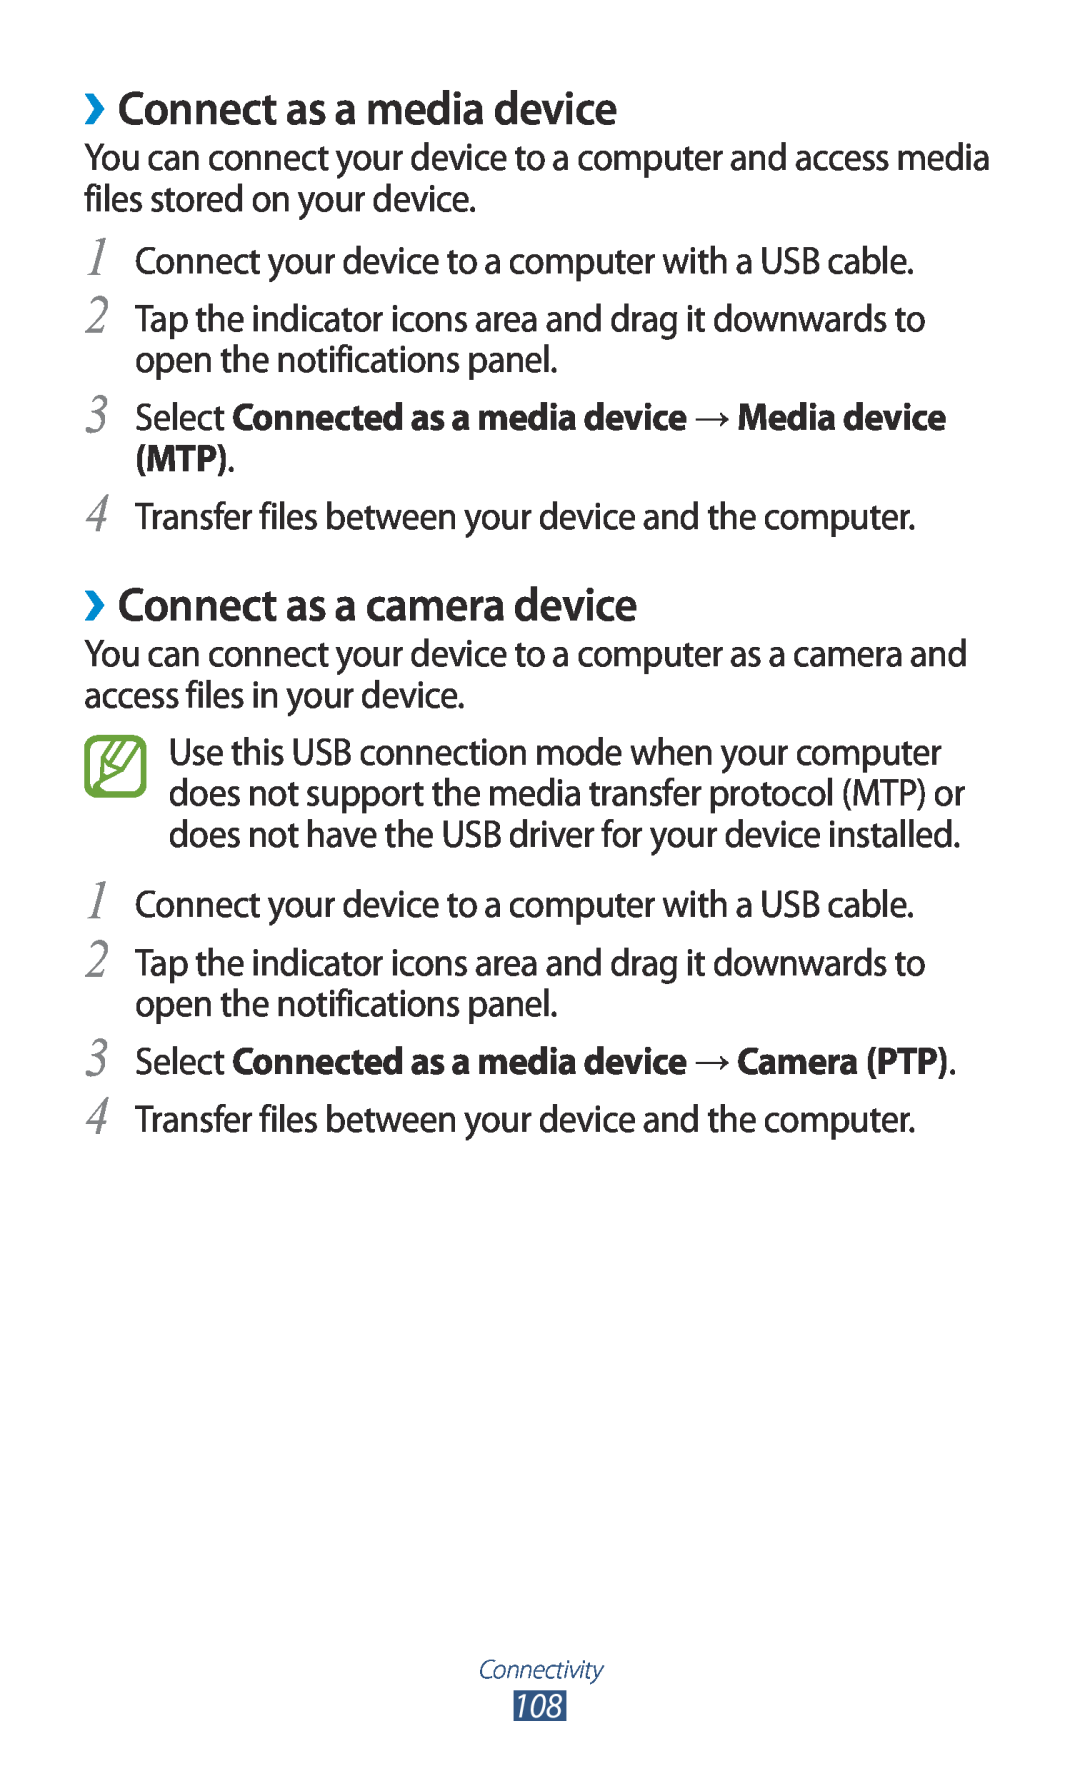 Samsung GT-S7560UWAPHE, GT-S7560ZKAVDR, GT-S7560ZKAPRT manual ››Connect as a media device, ››Connect as a camera device 